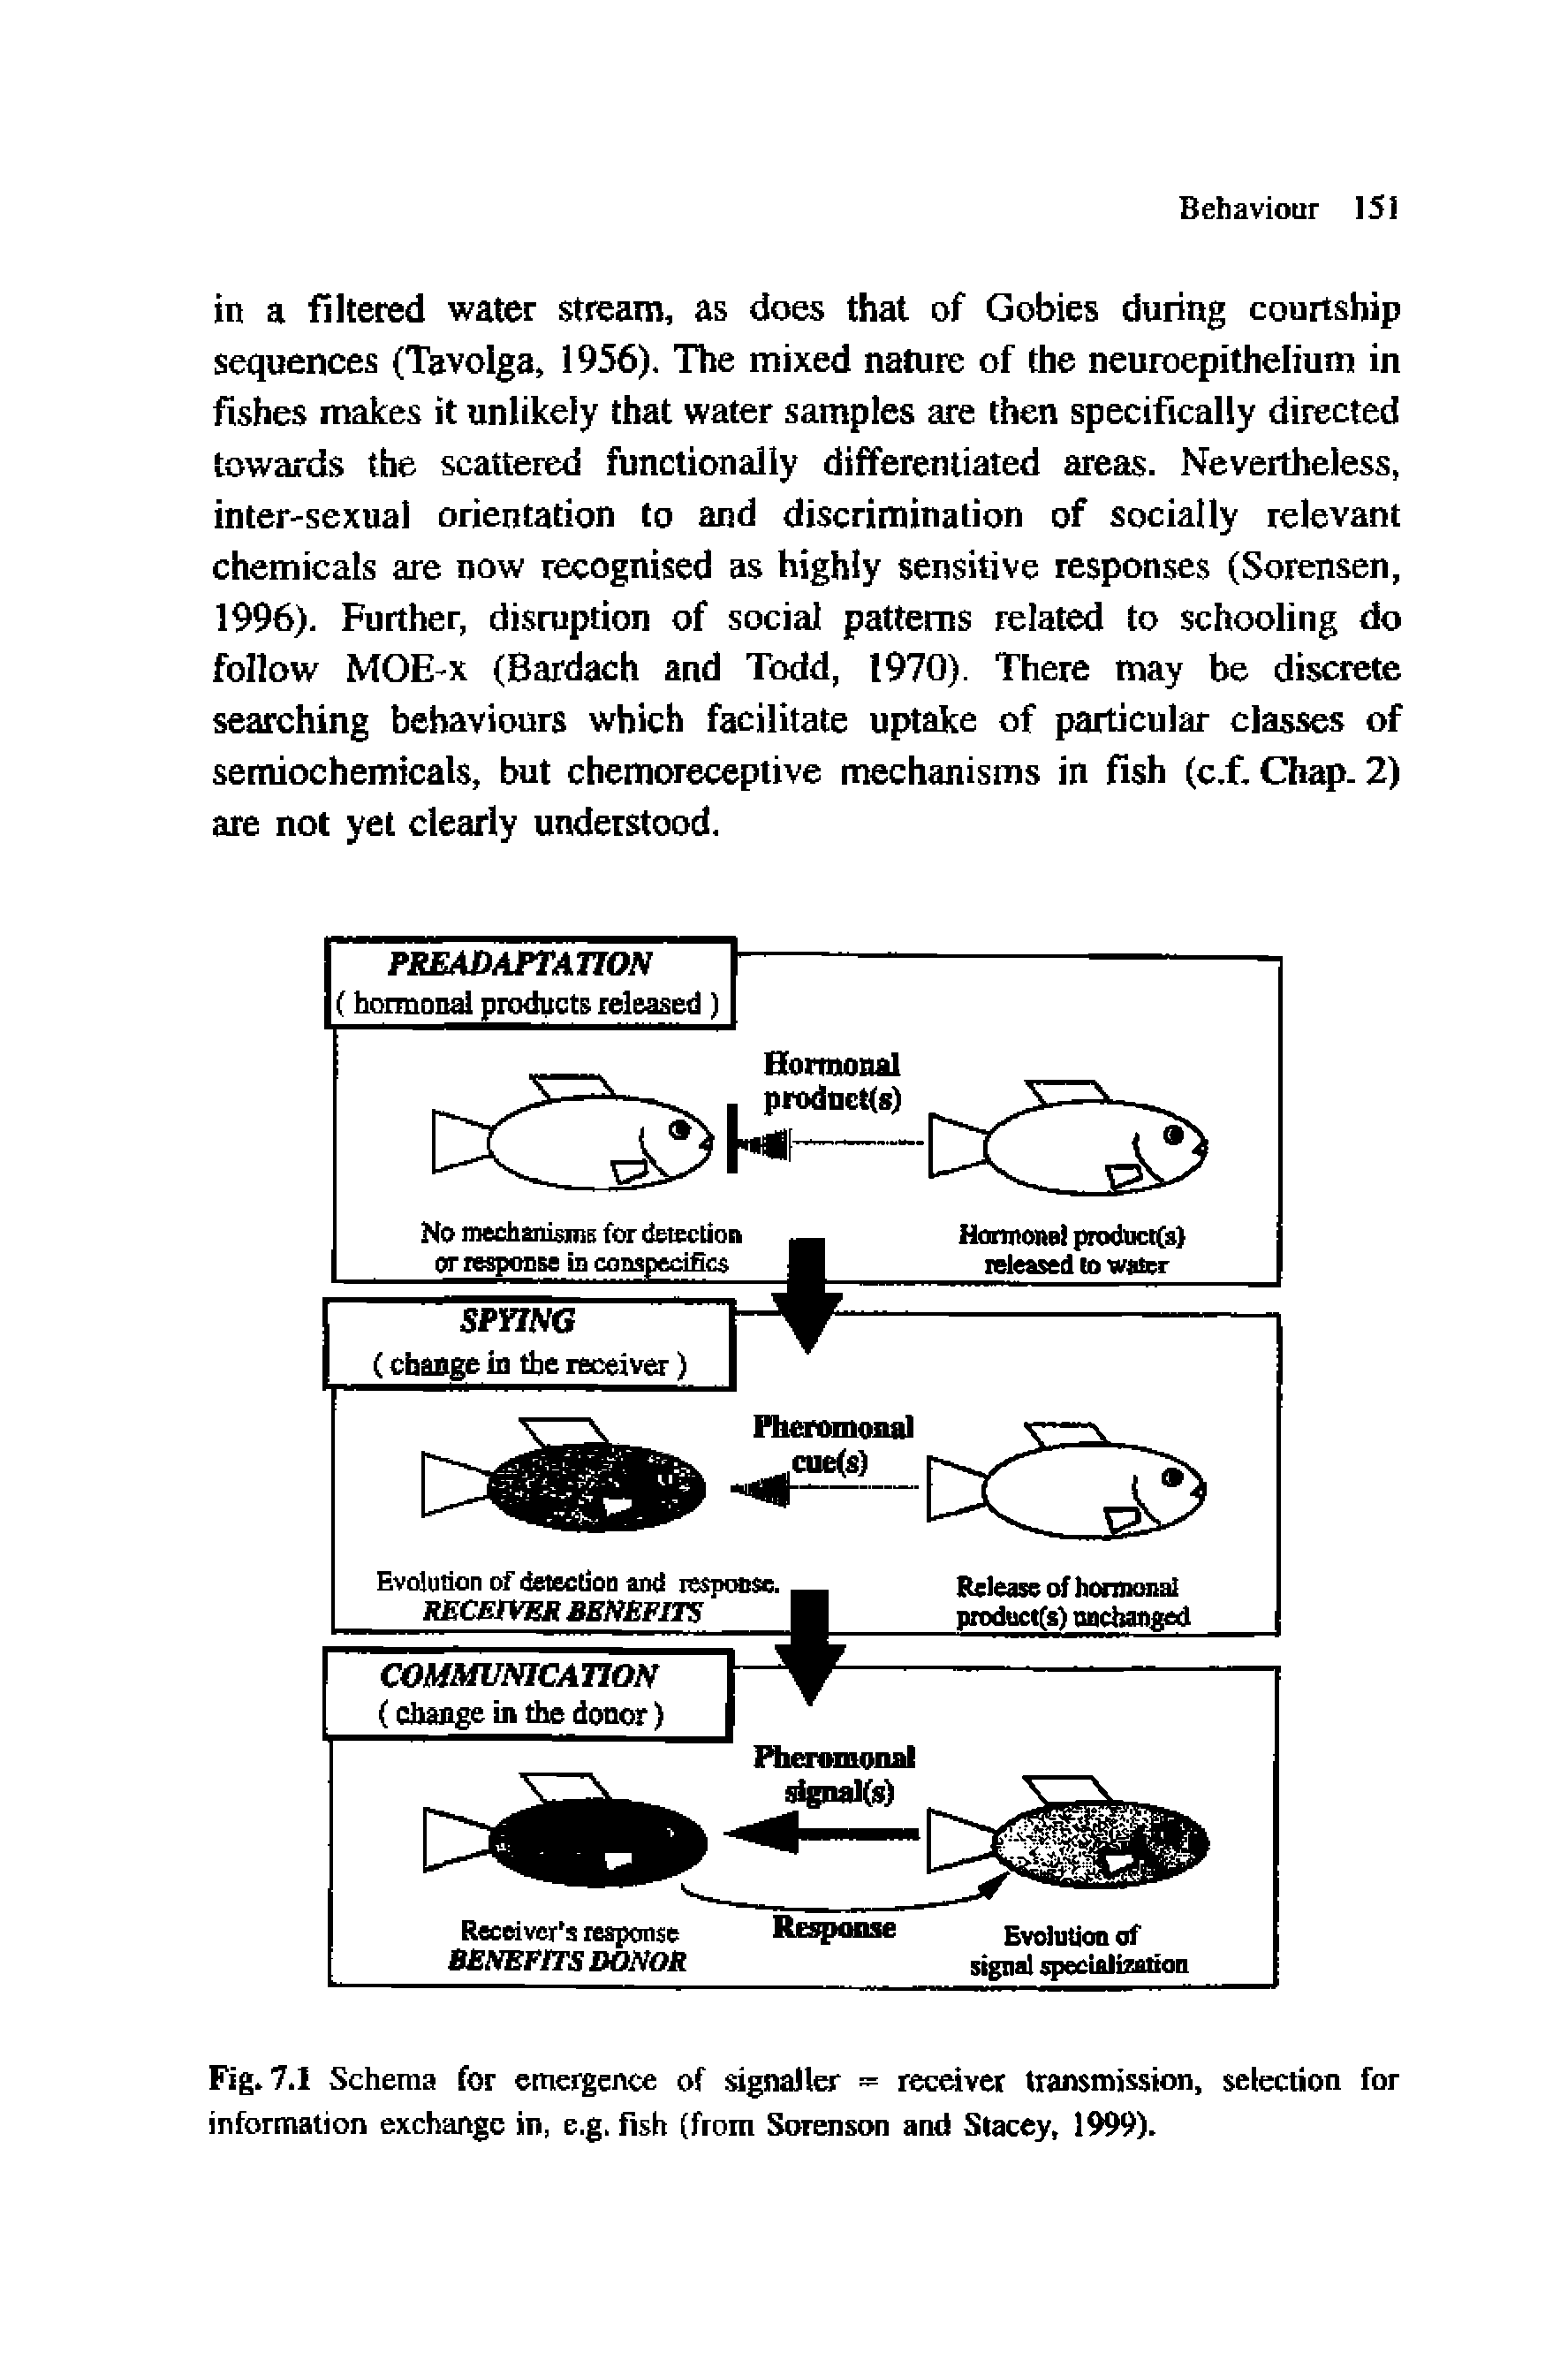 Fig. 7.1 Schema for emergence of signaller = receiver transmission, selection for information exchange in, e.g. Fish (from Sorenson and Stacey, 1999).